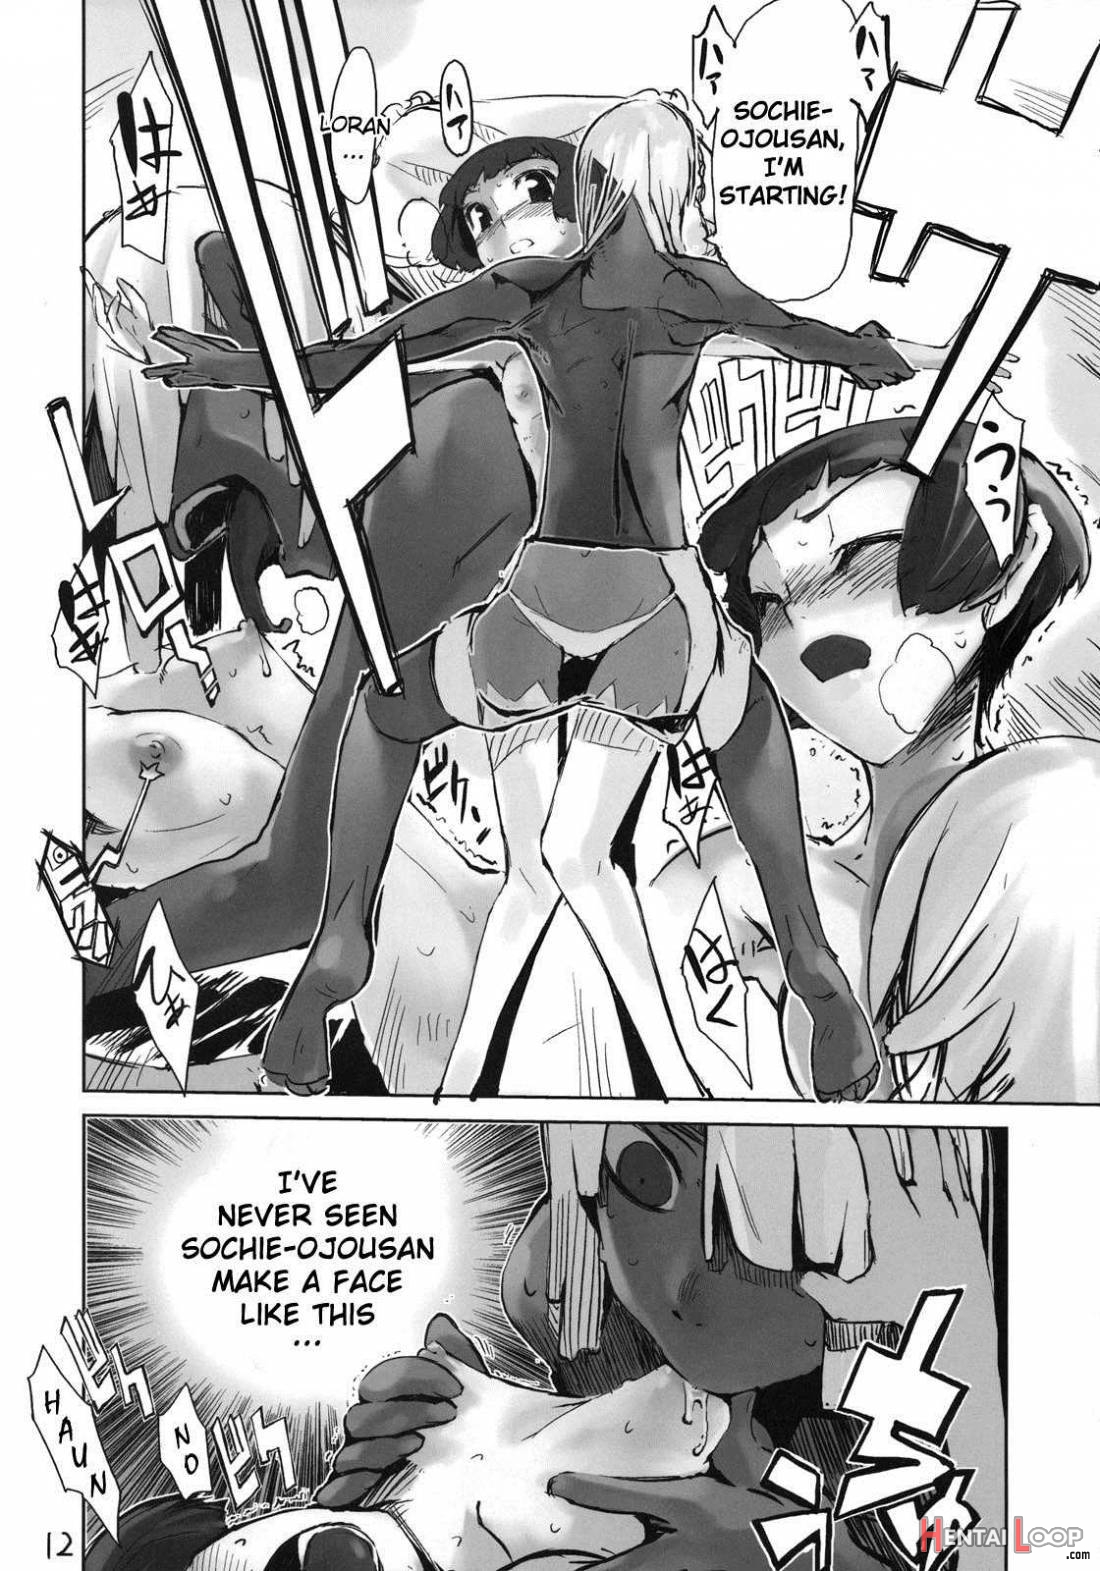 Moustache of white doll page 10